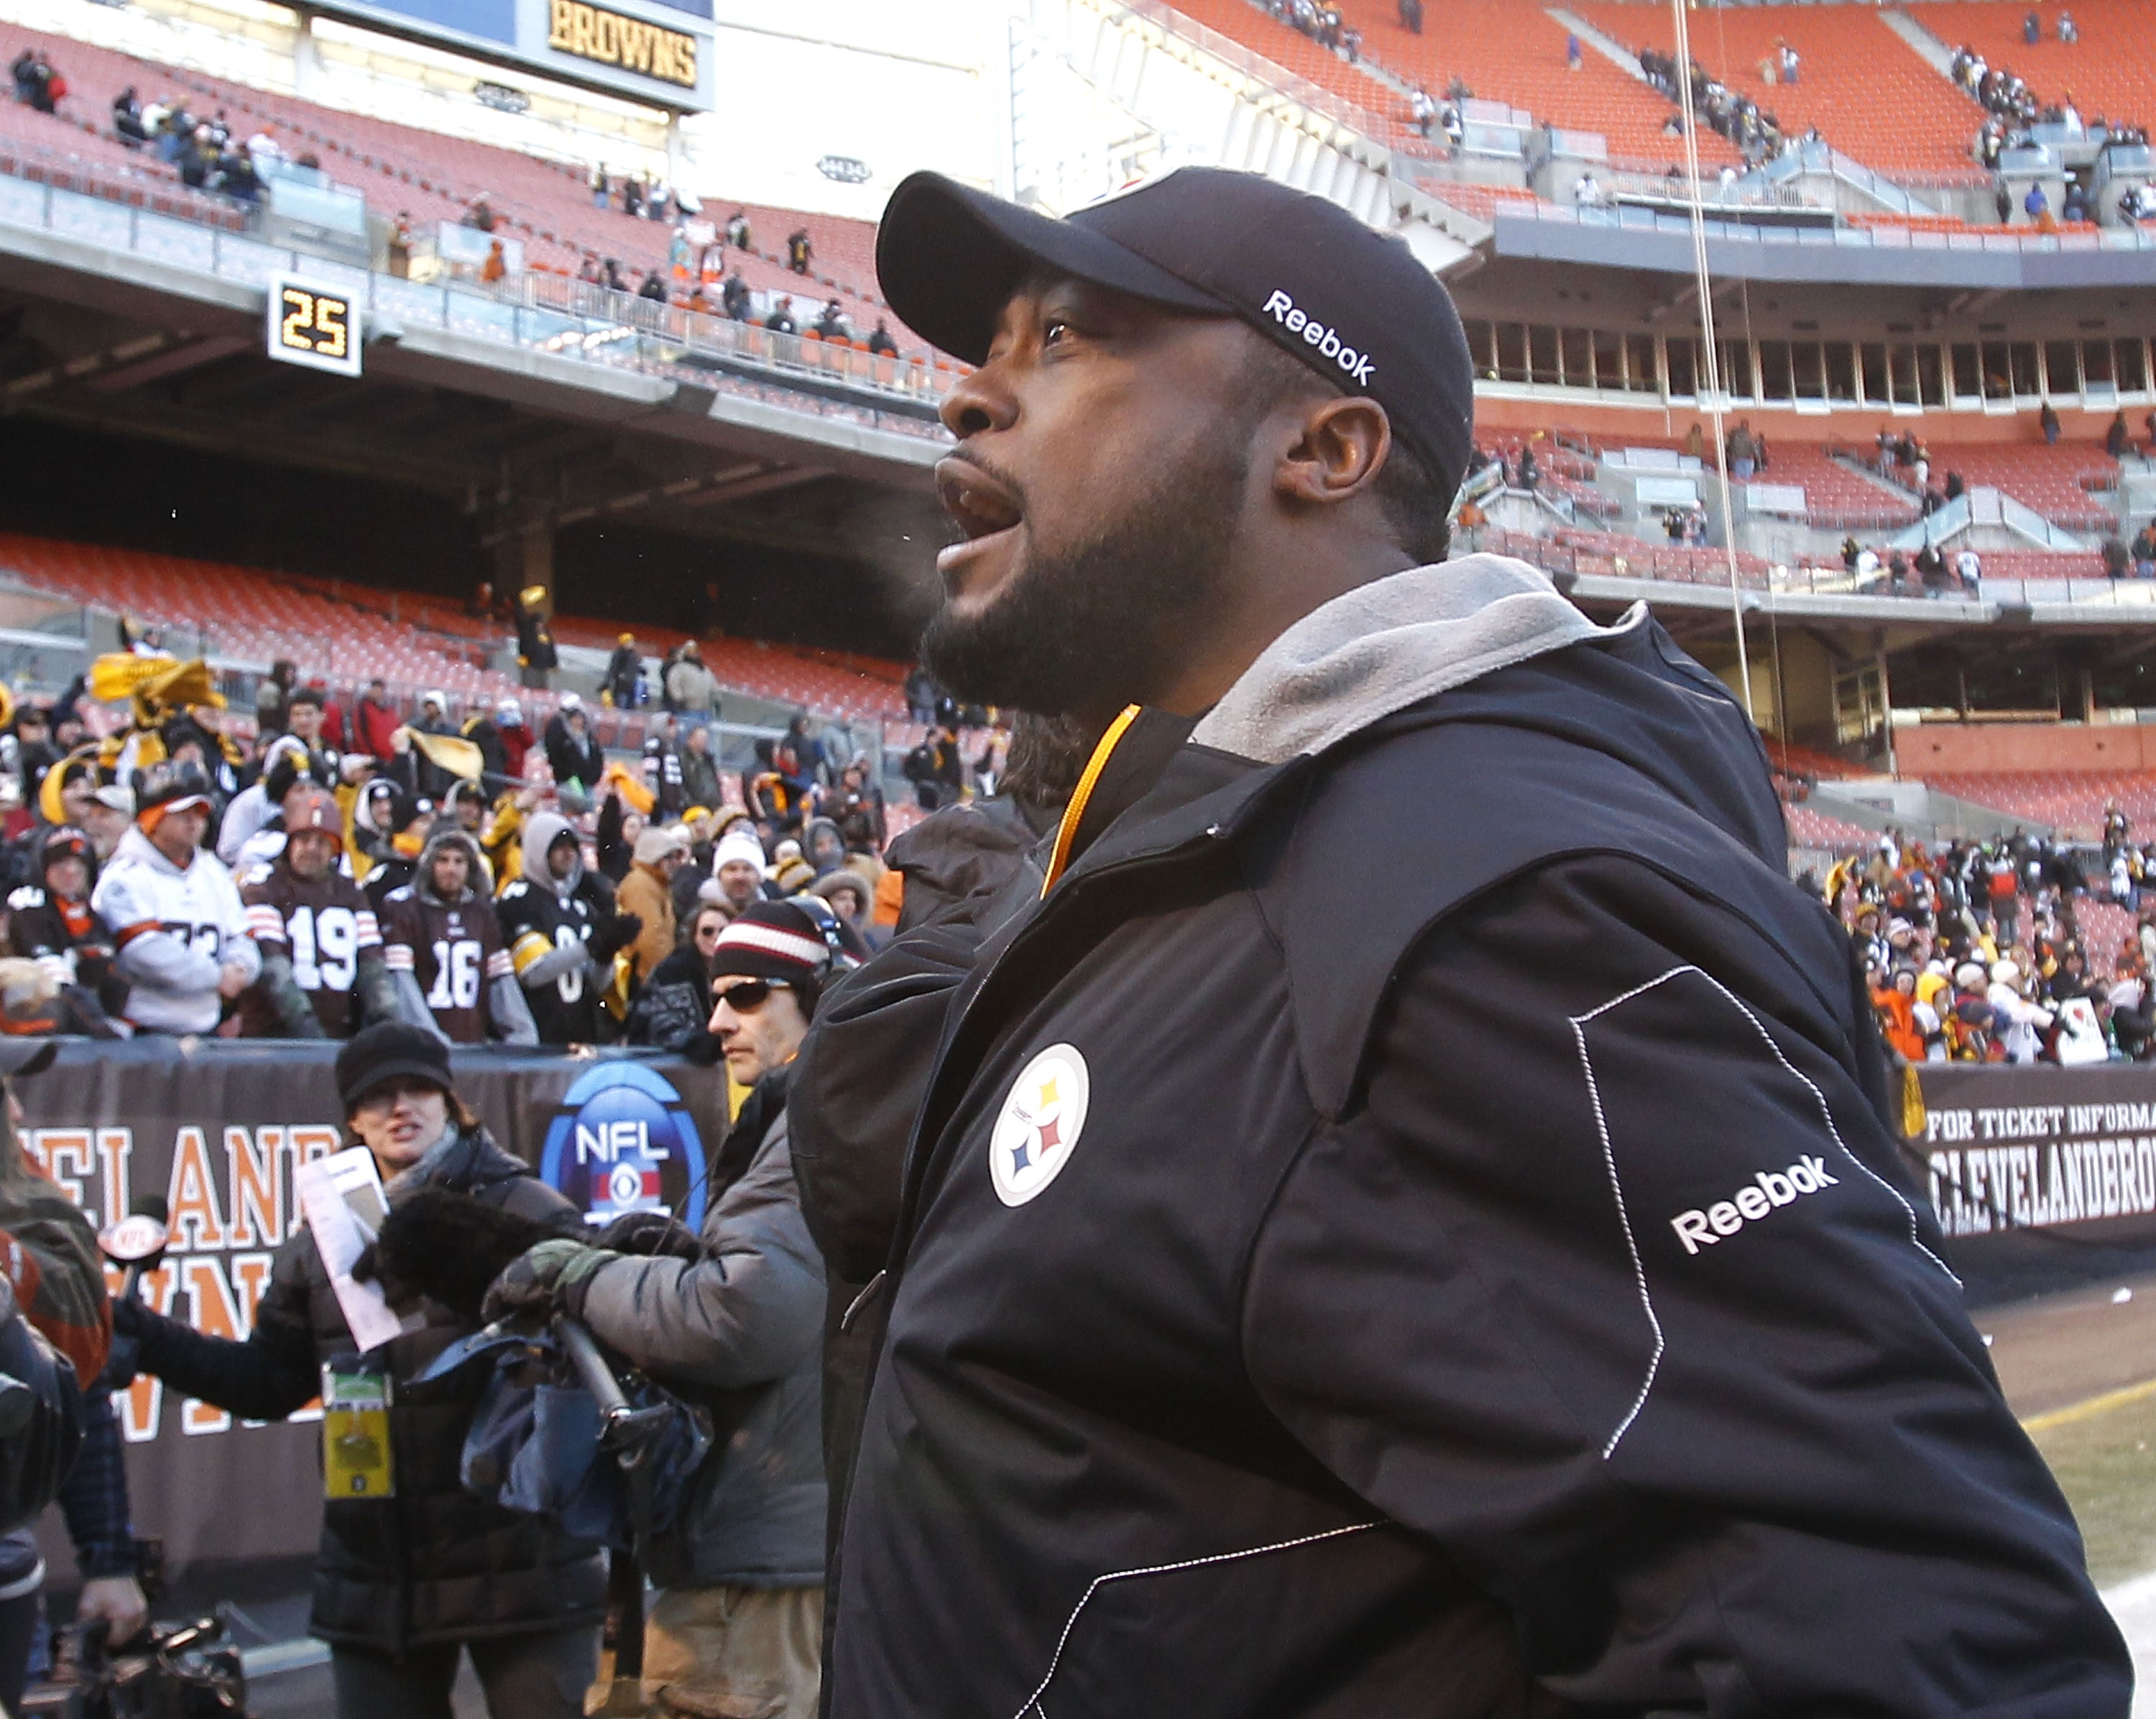 CLEVELAND, OH - JANUARY 02:  Head coach Mike Tomlin of the Pittsburgh Steelers celebrates after their 41-9 victory over the Cleveland Browns at Cleveland Browns Stadium on January 2, 2011 in Cleveland, Ohio.  (Photo by Matt Sullivan/Getty Images)